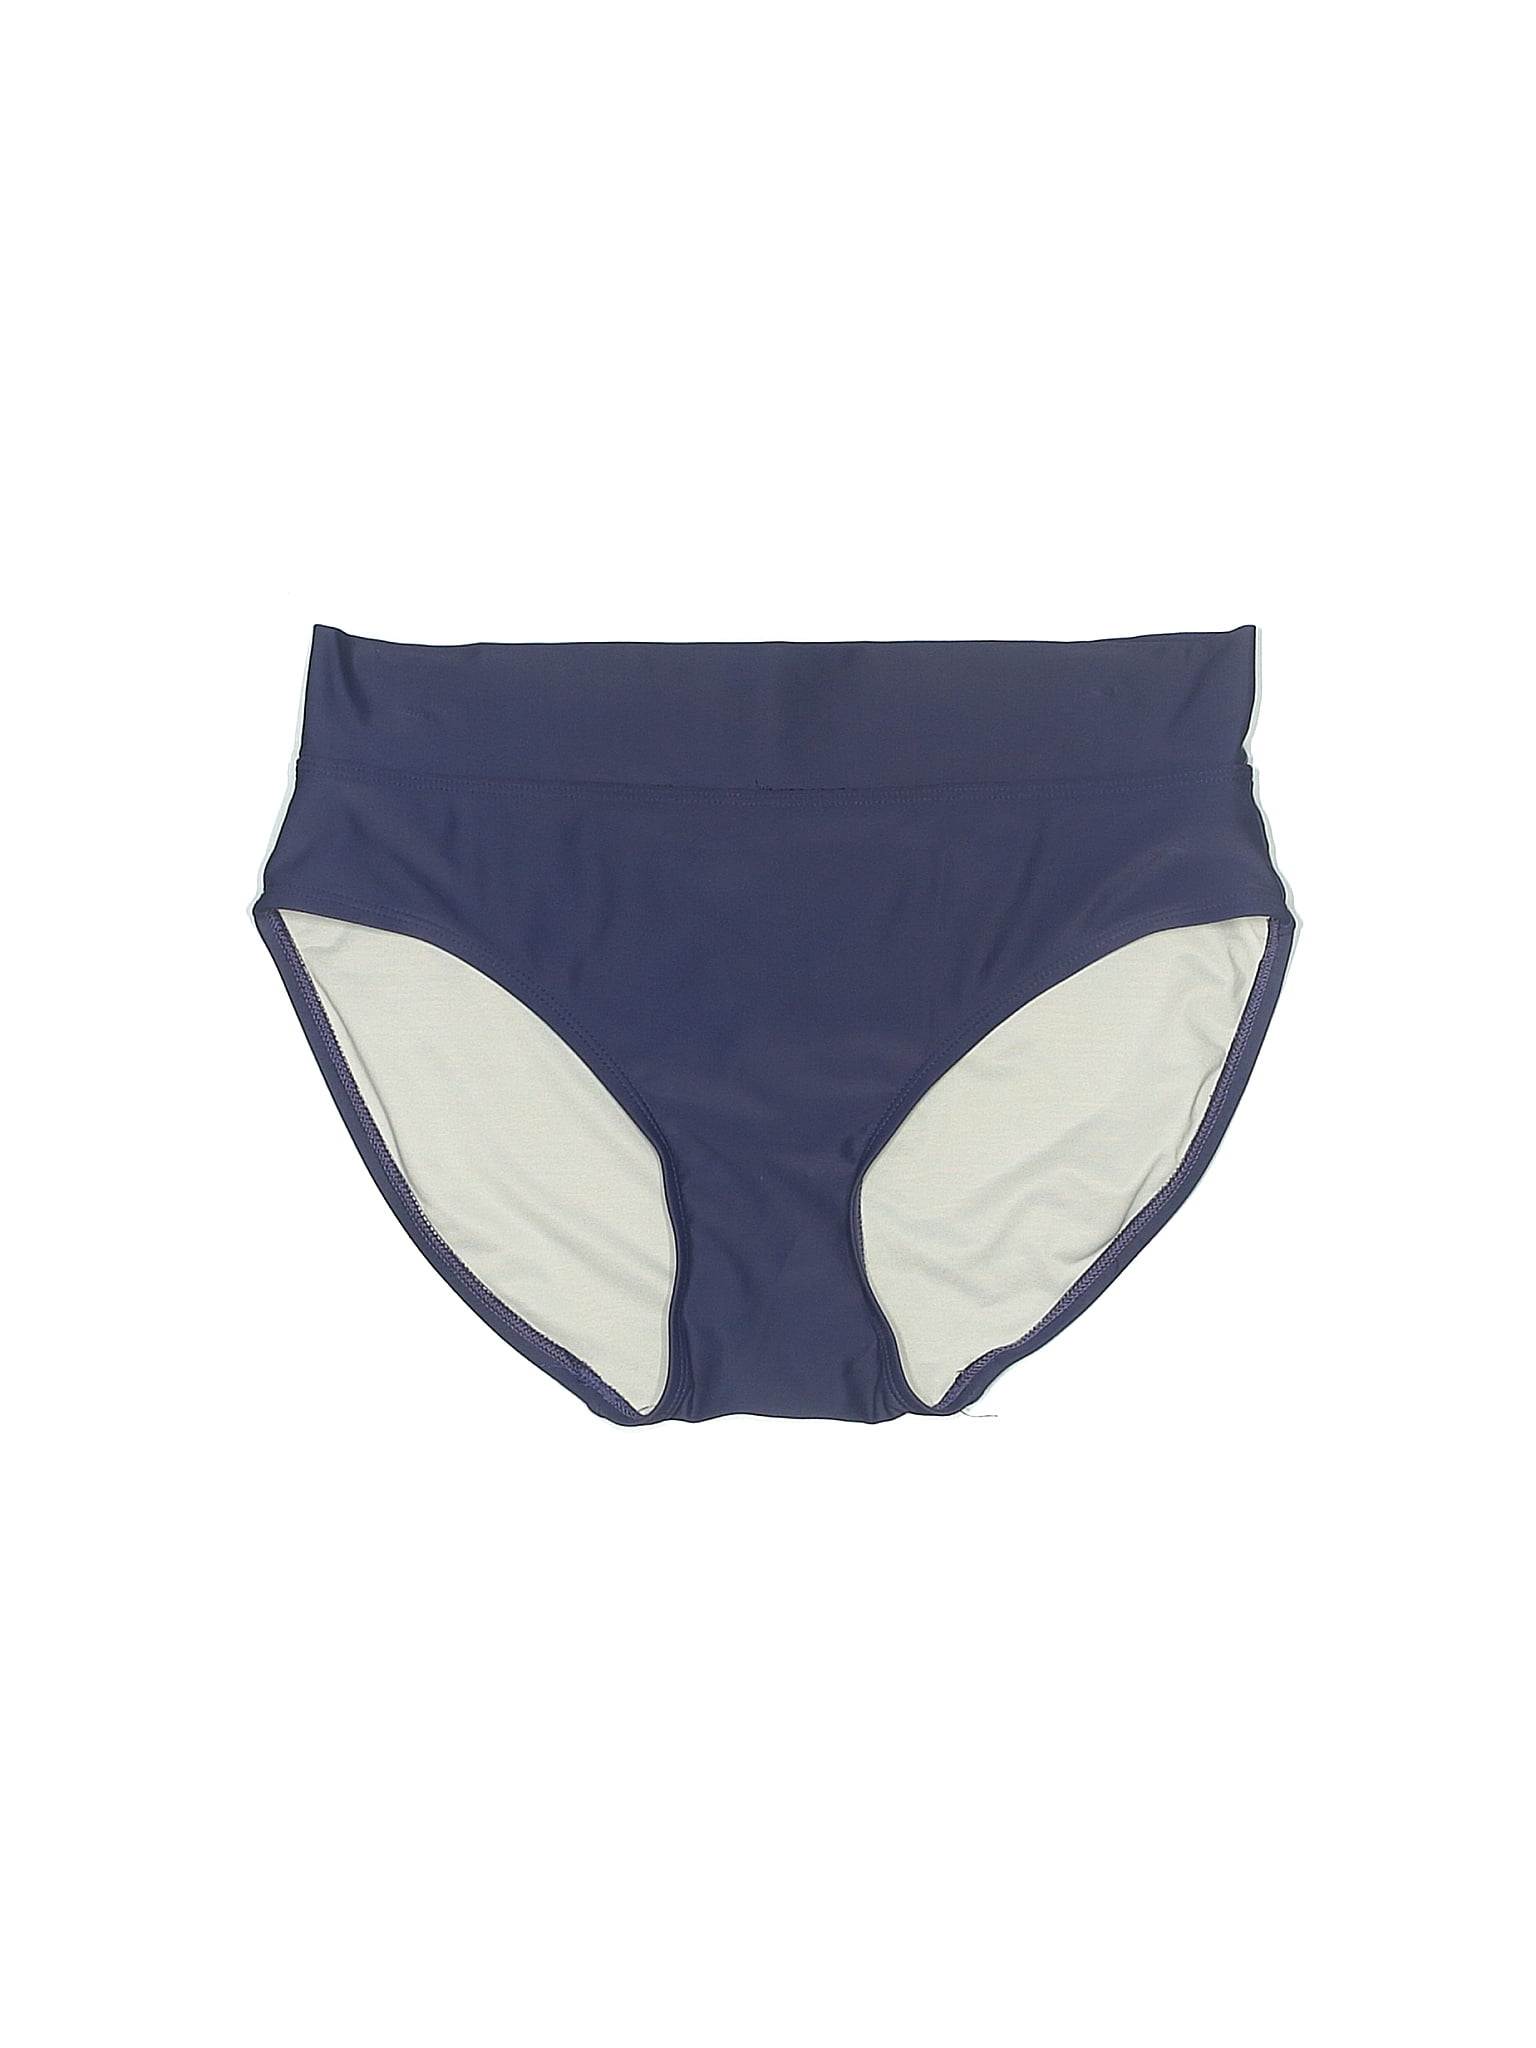 Lime Ricki Solid Navy Blue Swimsuit Bottoms Size M - 70% off